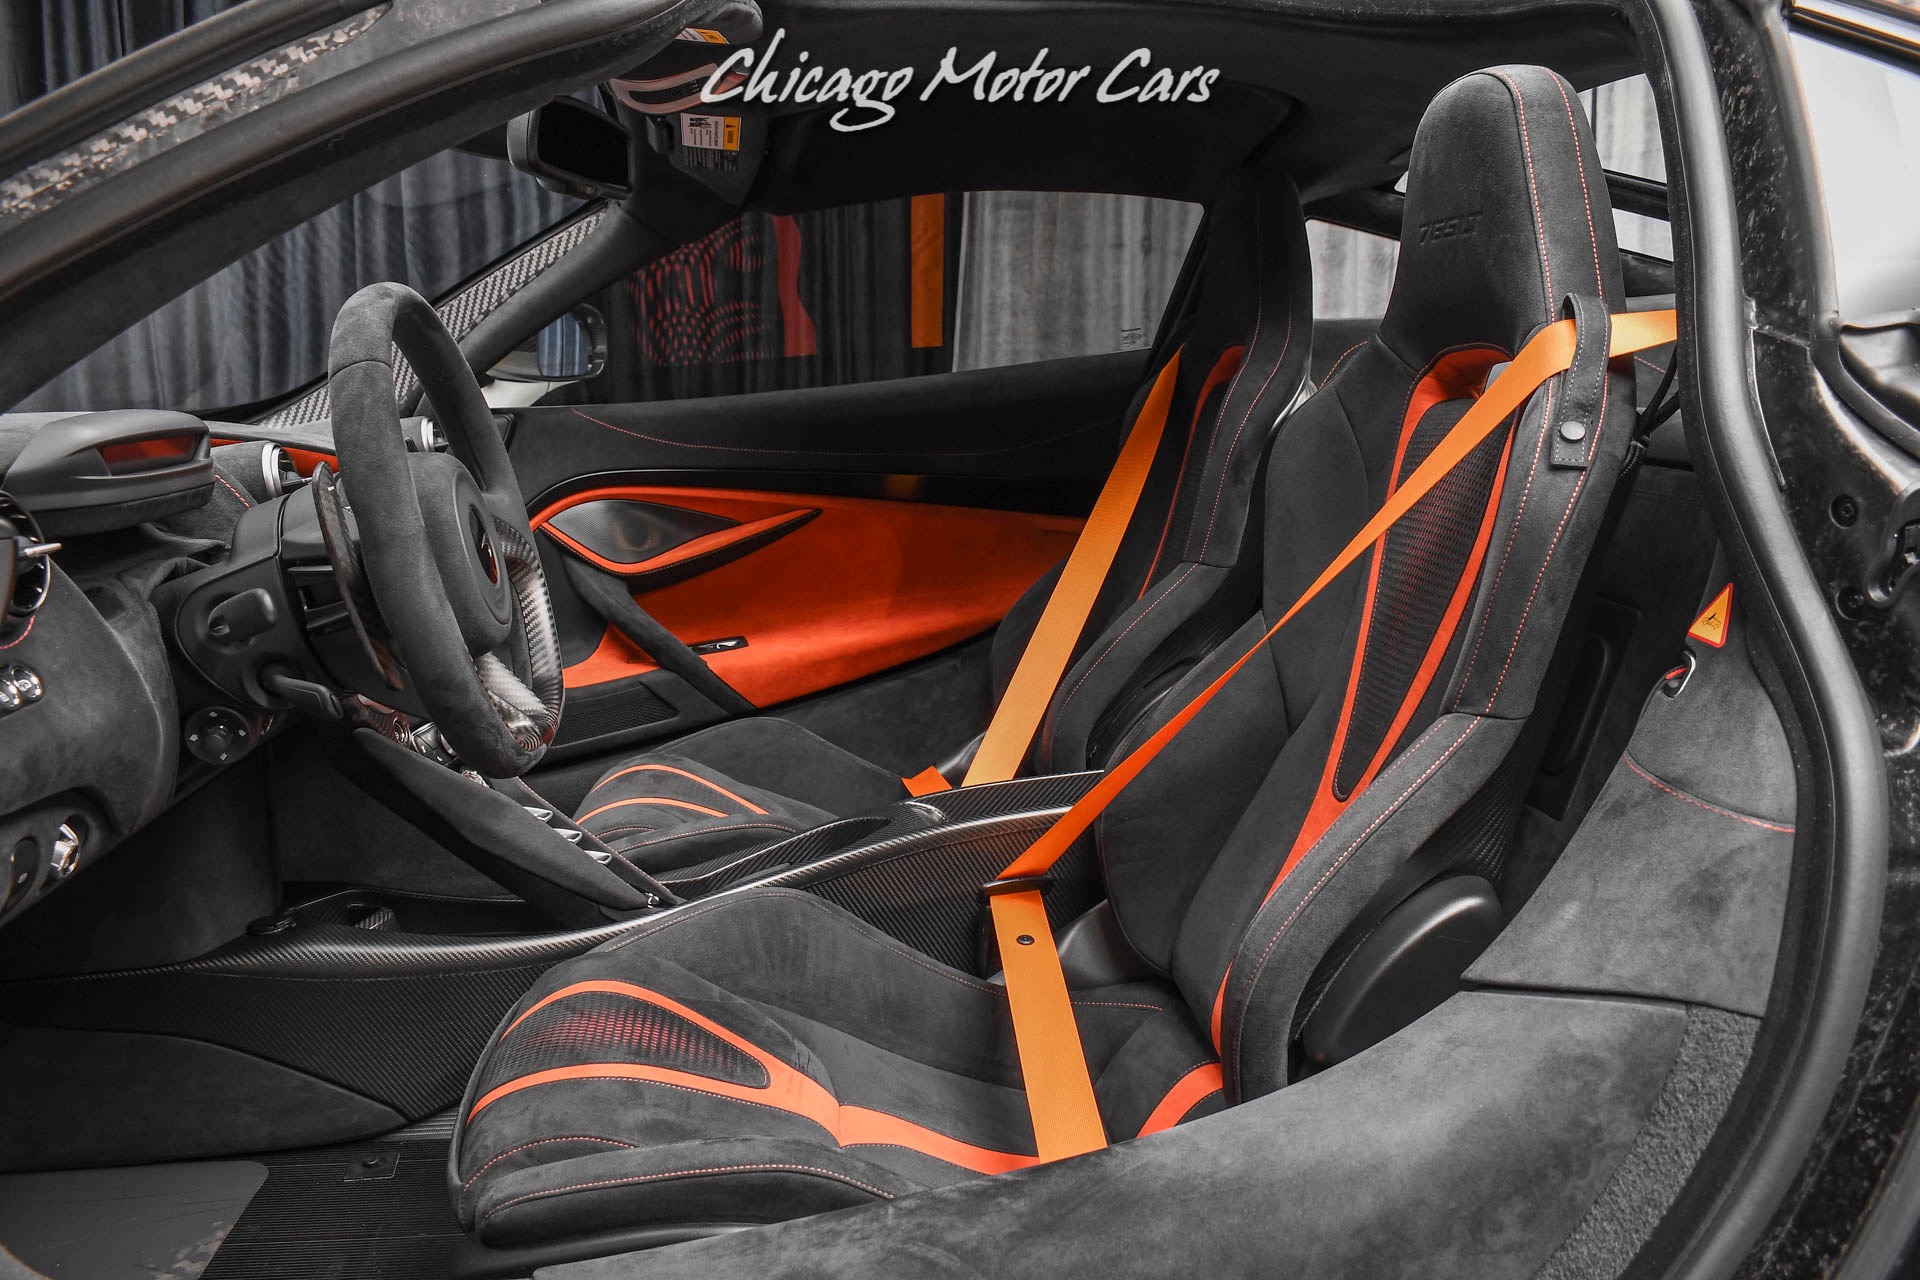 Used-2021-McLaren-765LT-Coupe--108-of-765-Lift-System-Only-1900-Miles-Carbon-Fiber-LOADED